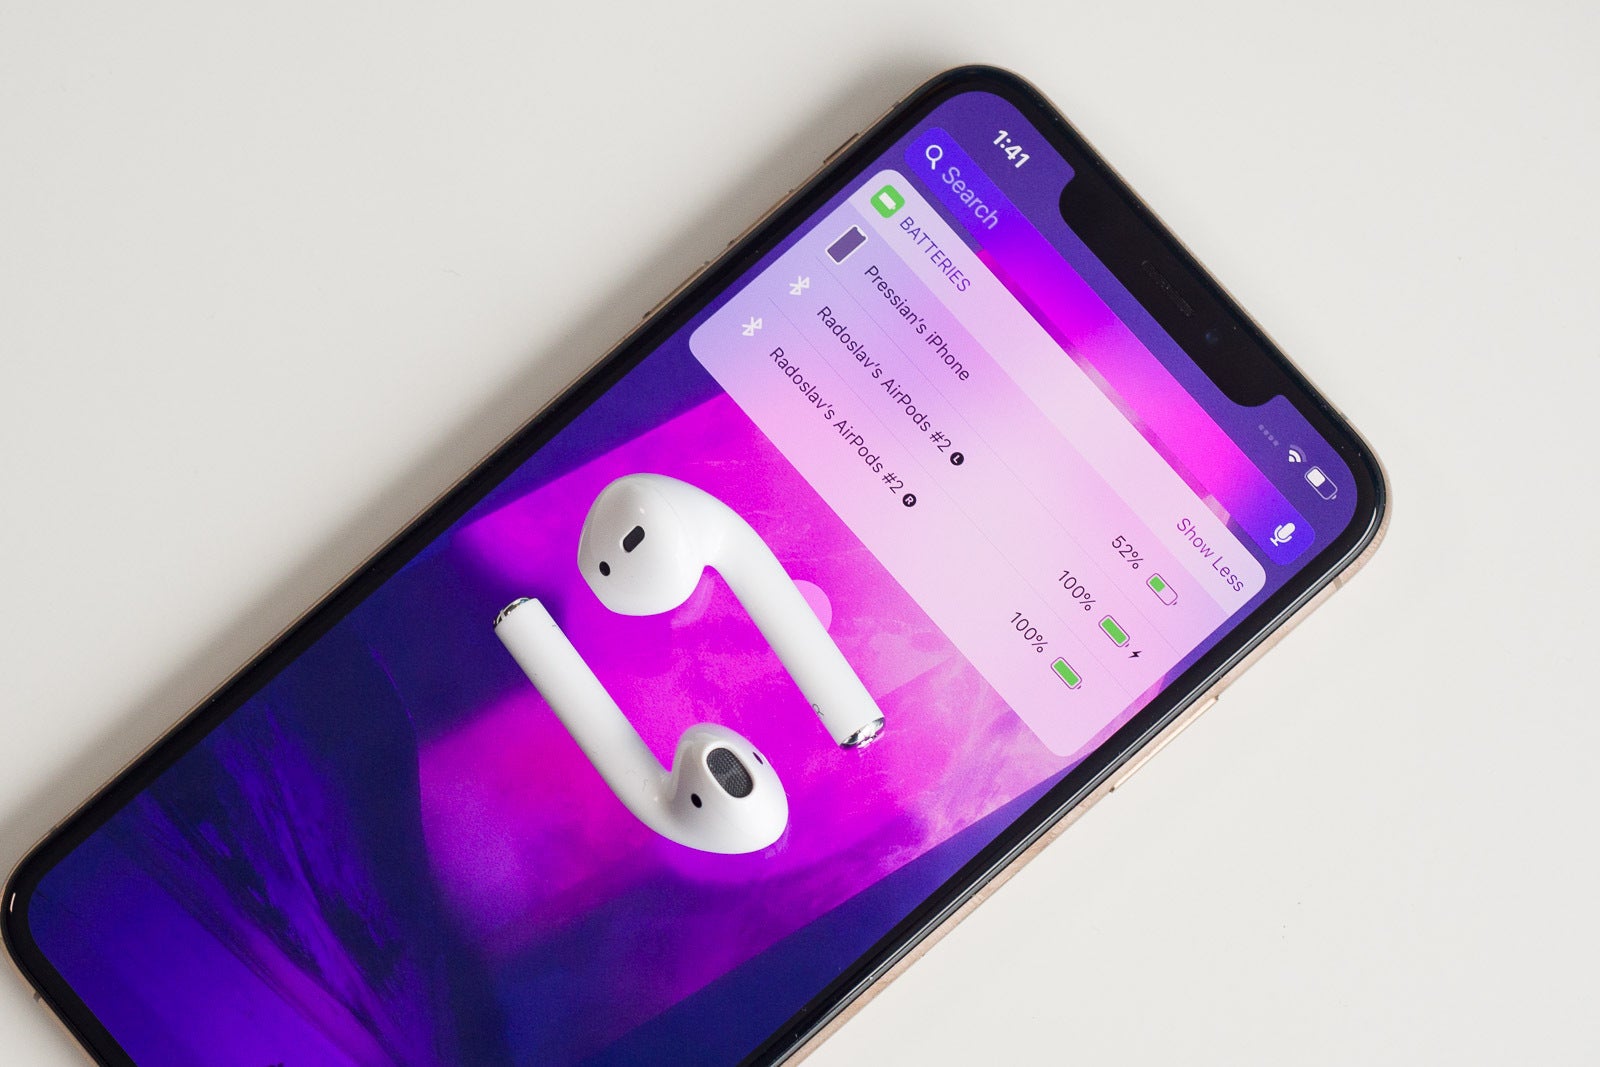 Apple might ship the iPhone 12 5G without earphones to boost AirPods sales